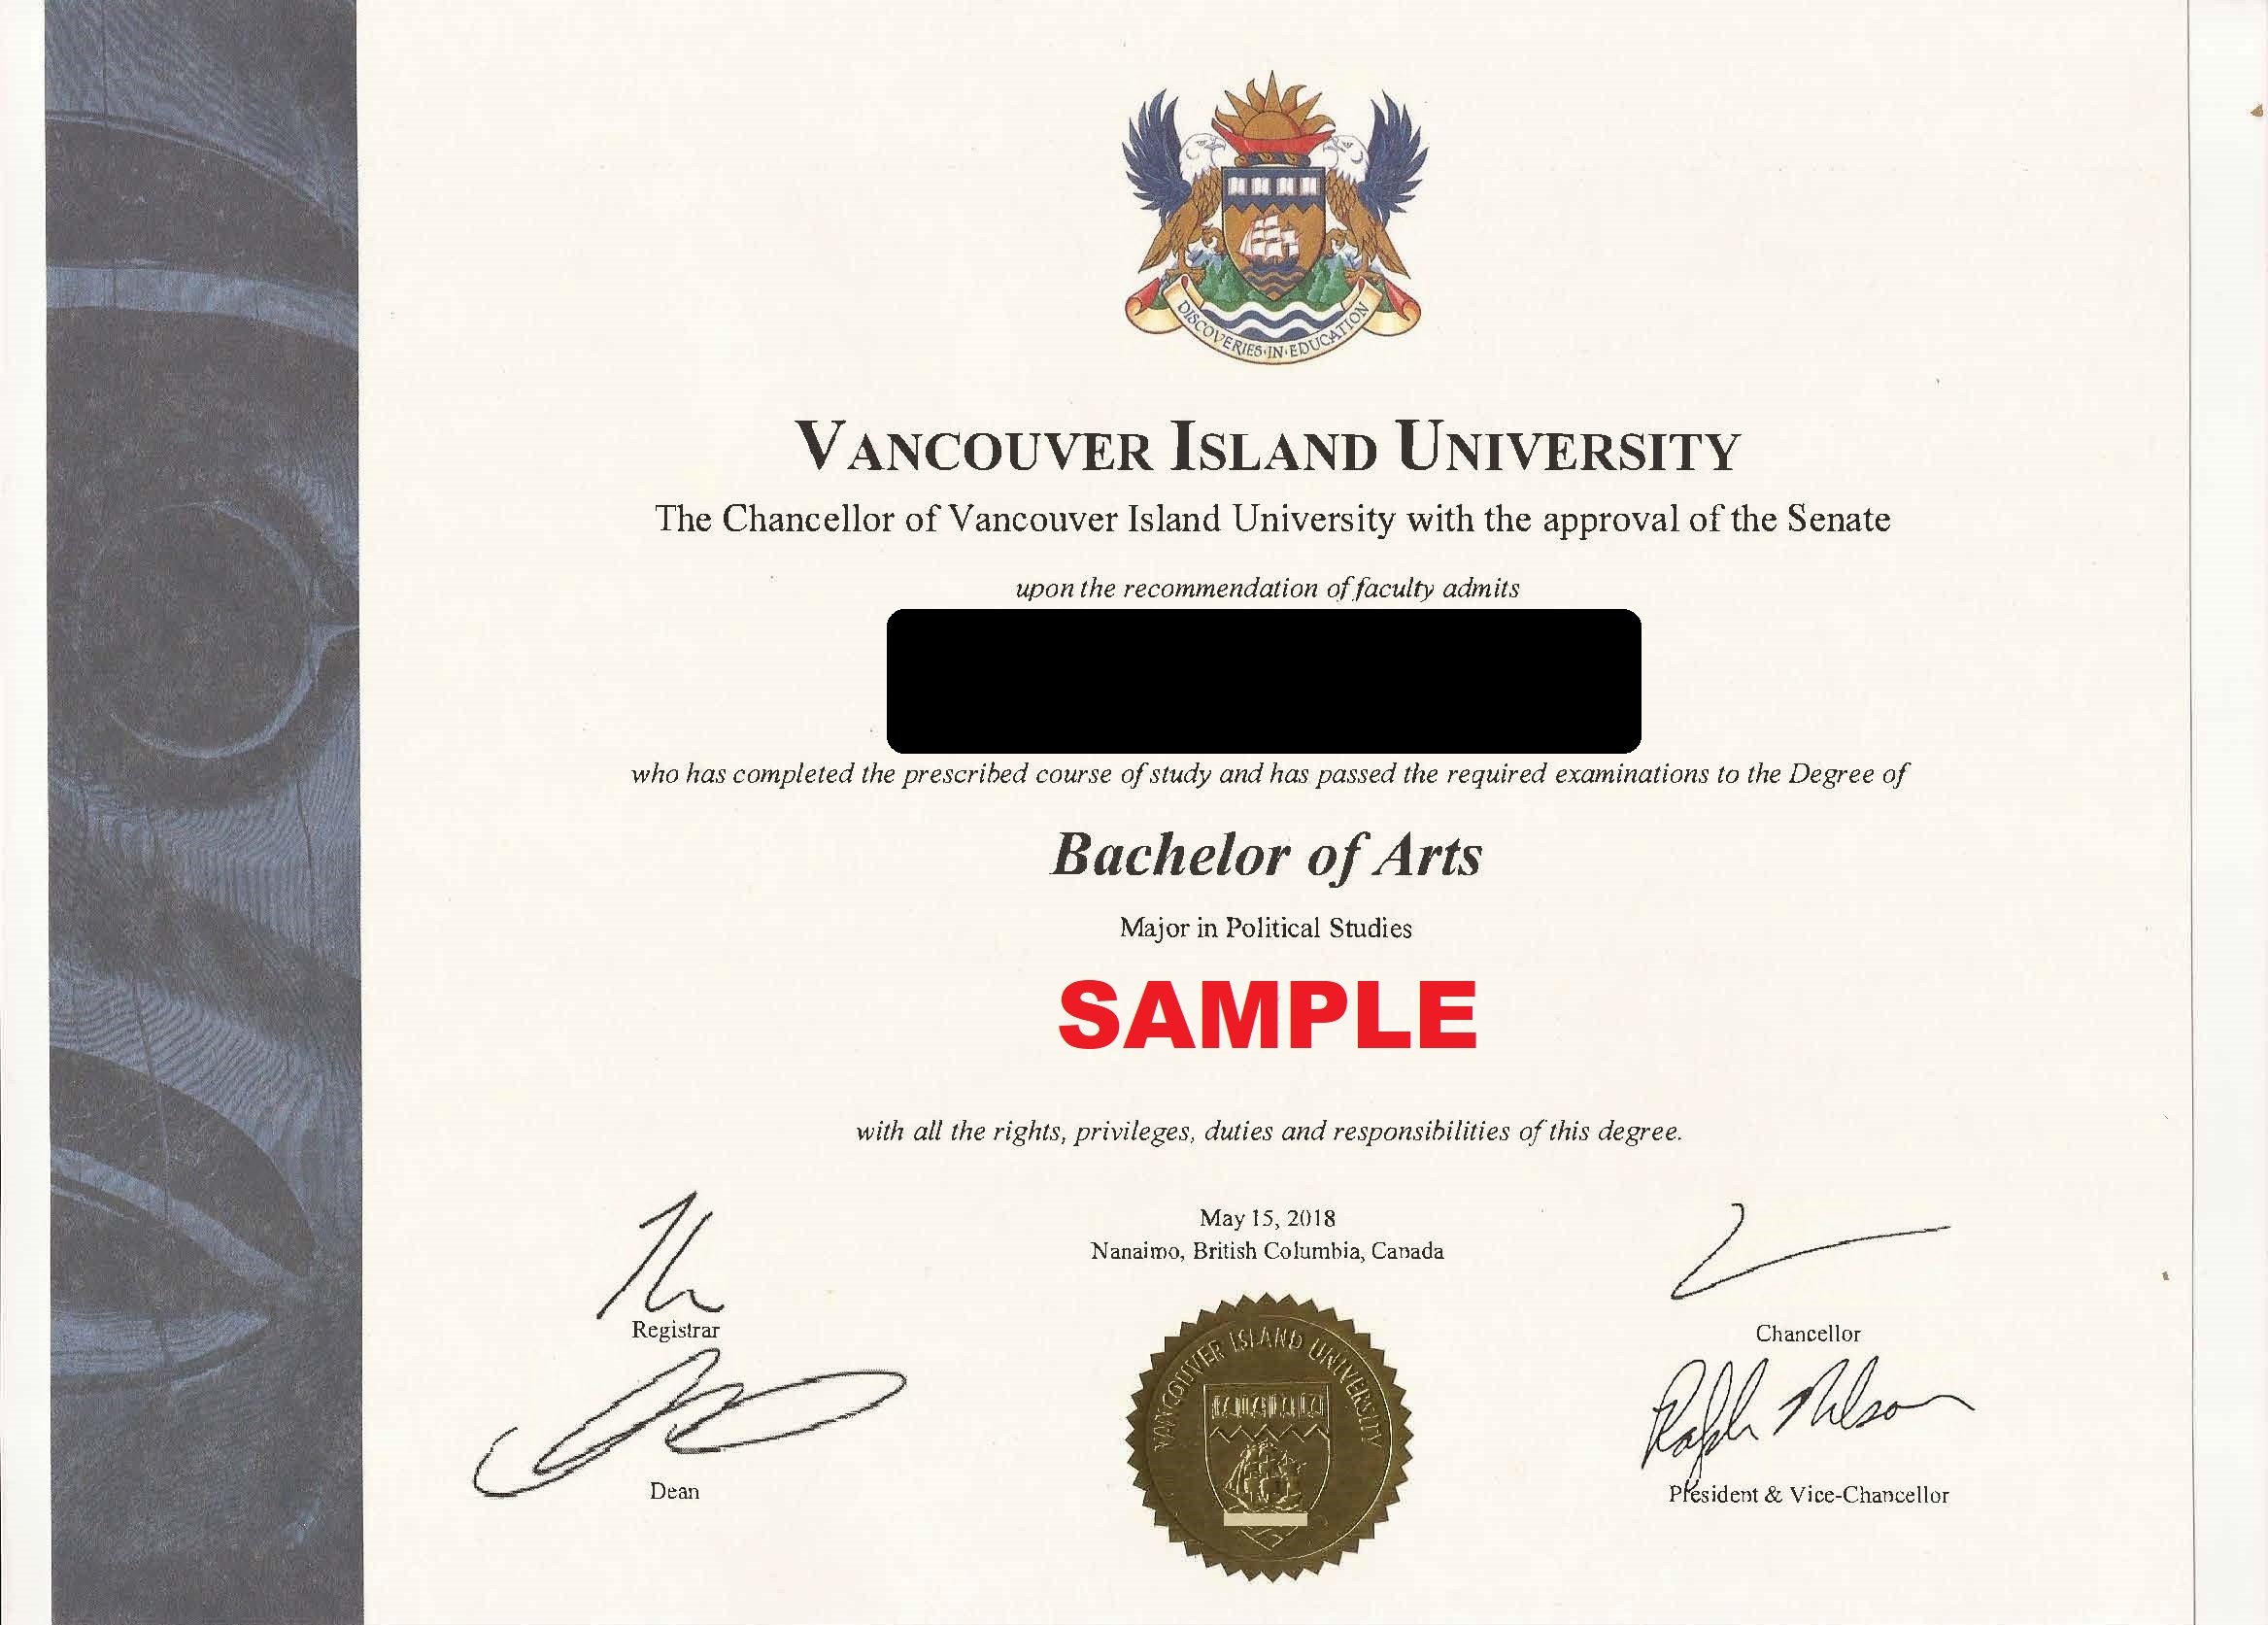 Sample image of a post secondary diploma issued by a BC public education institution